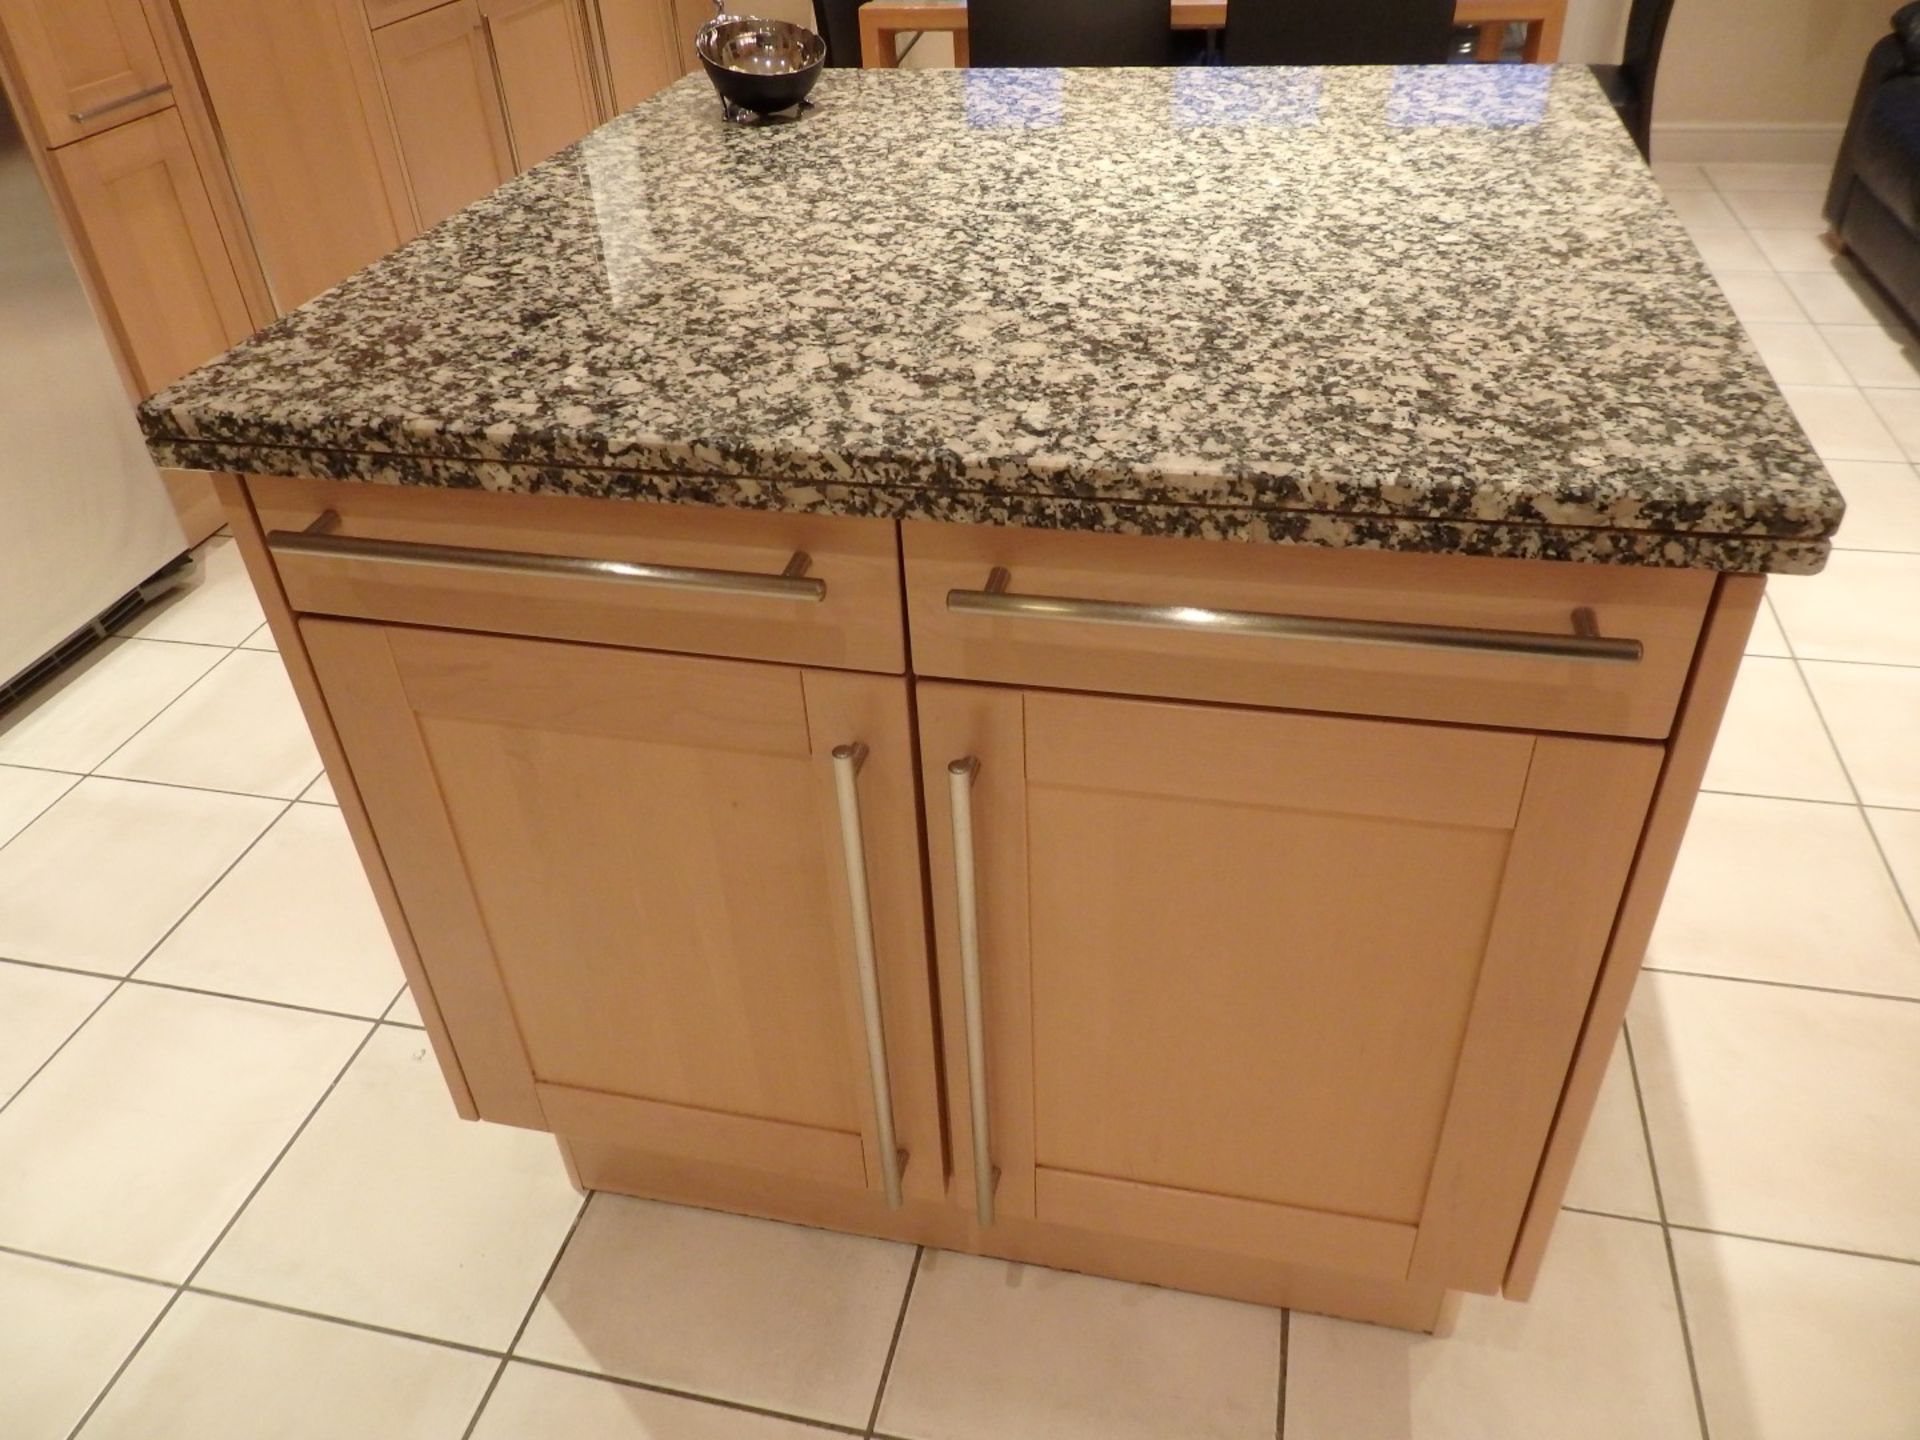 1 x Siematic Fitted Kitchen With Beech Shaker Style Doors, Granite Worktops, Central Island and - Image 70 of 151